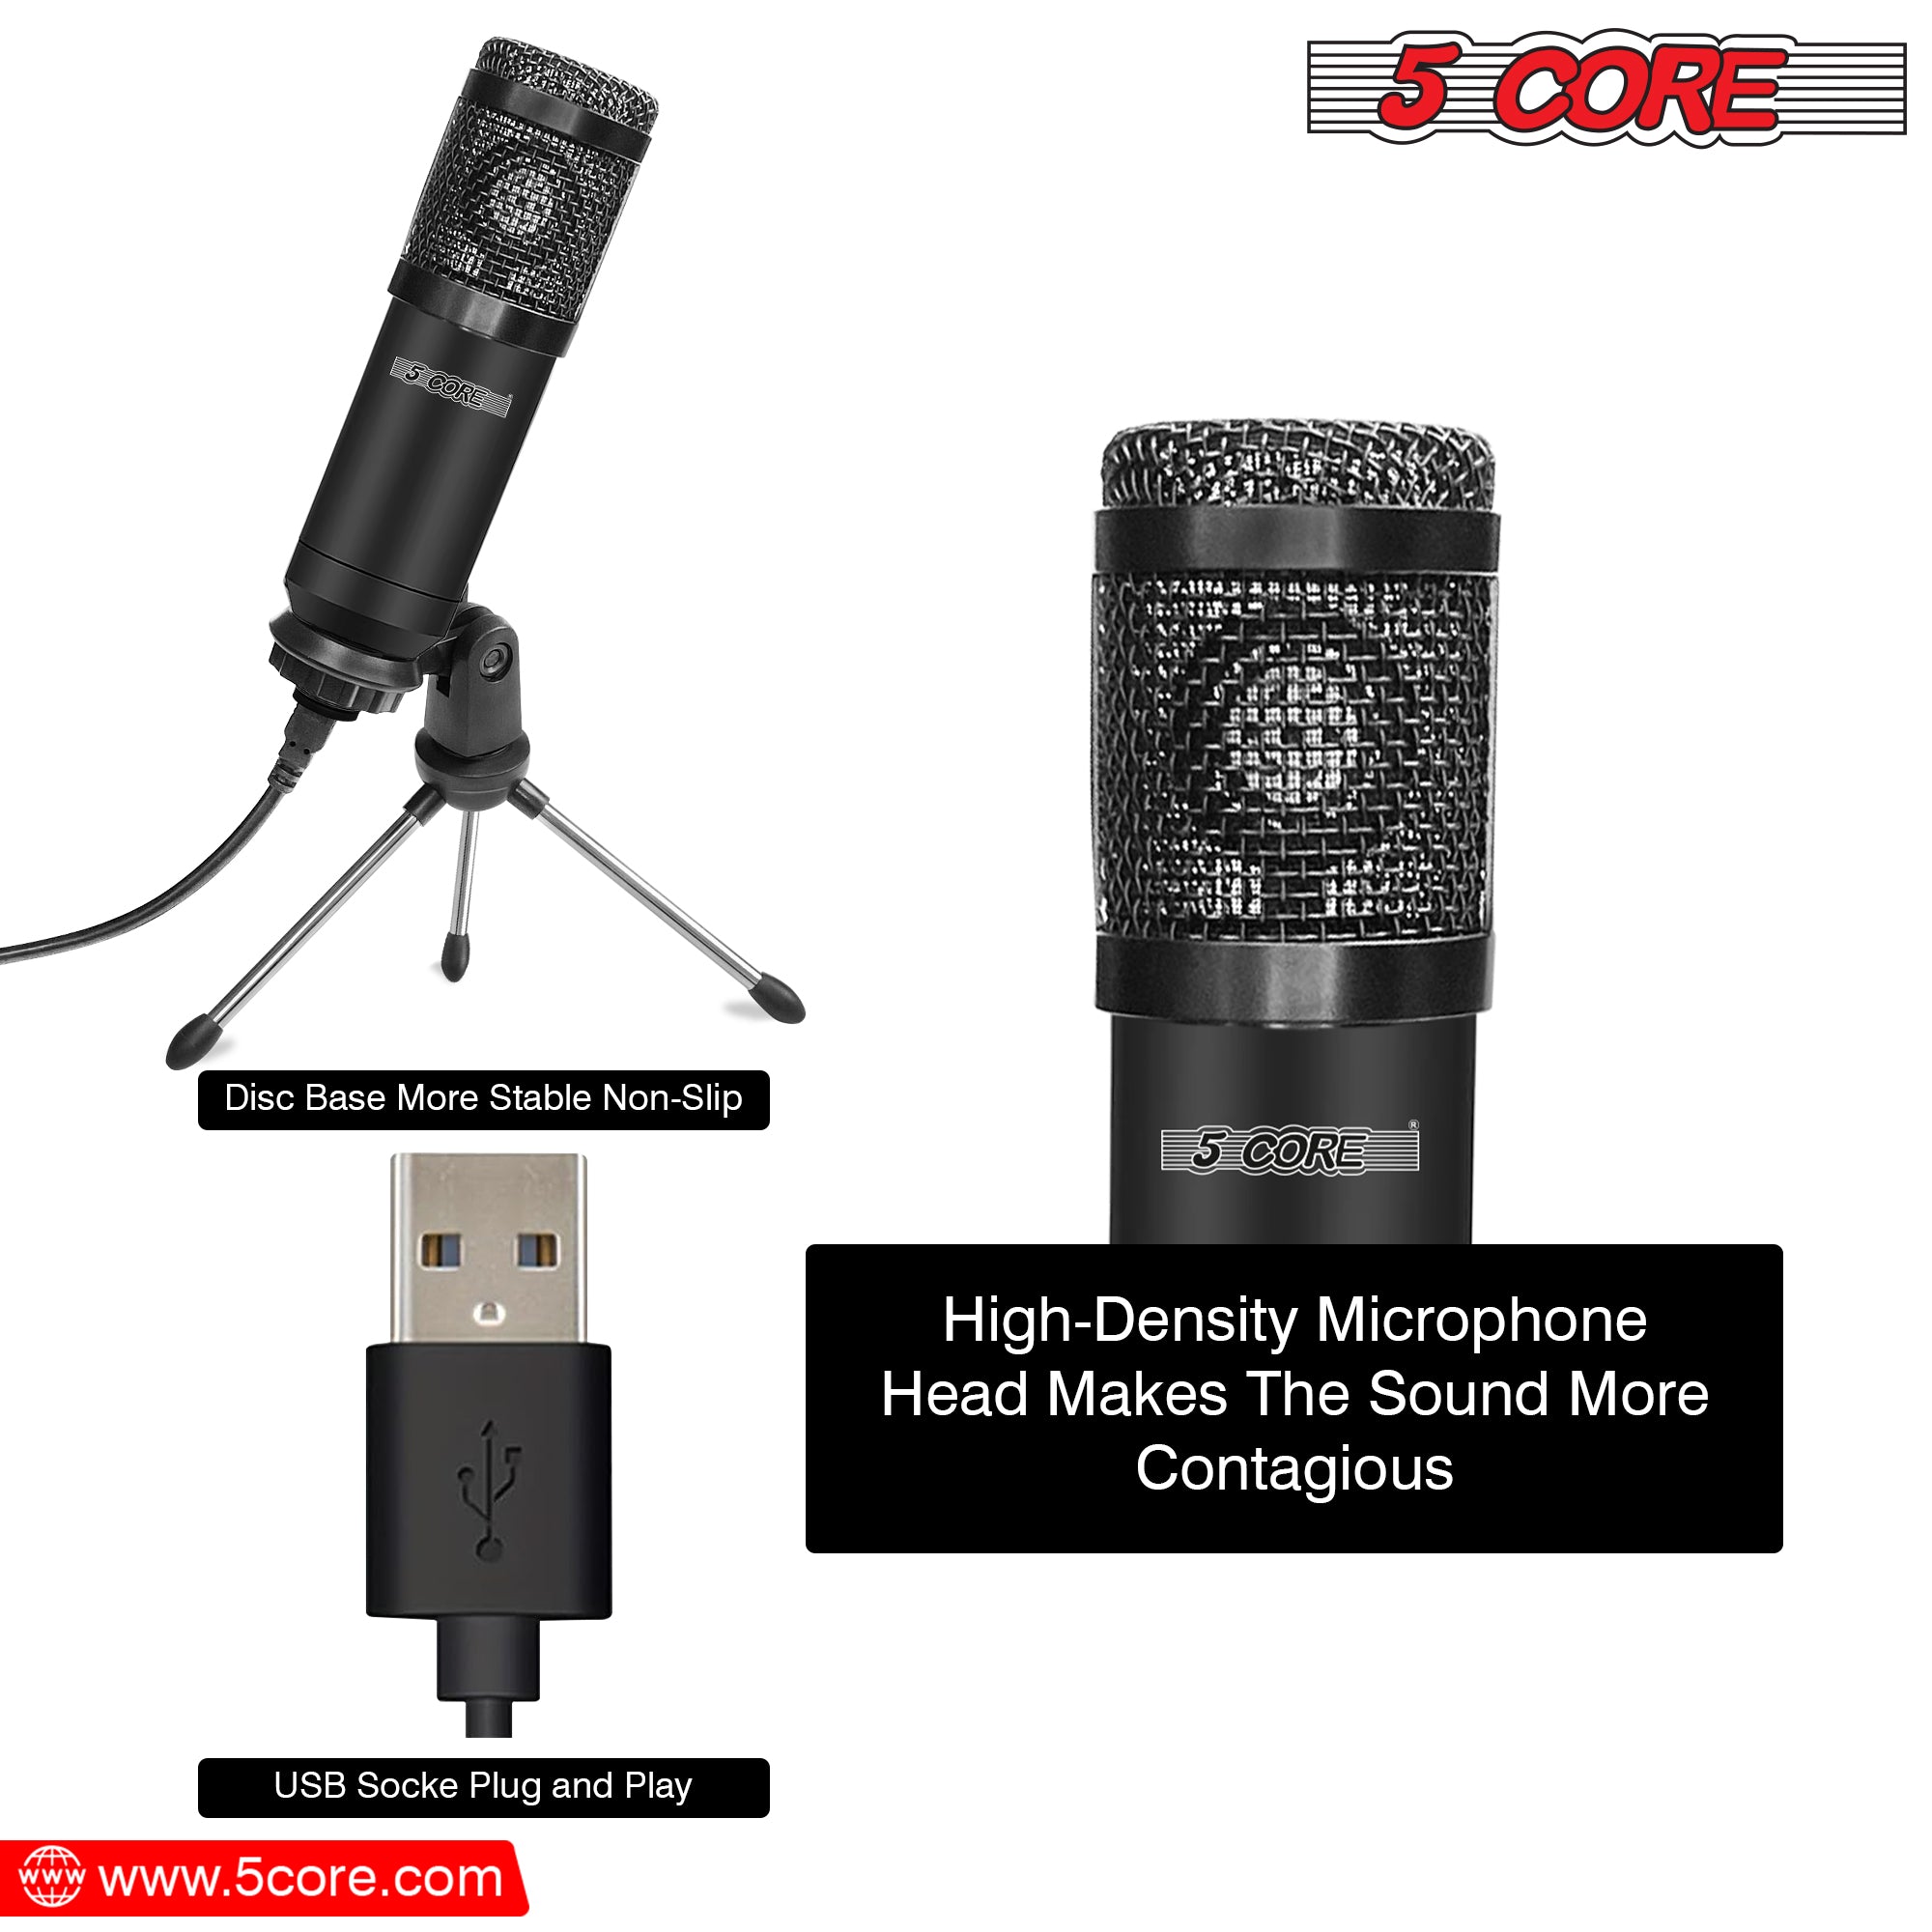 5 Core Podcast Equipment Bundle All in One Podcast Kit w Condenser Microphone Perfect for Recording Broadcasting Live Streaming - RM 4 B